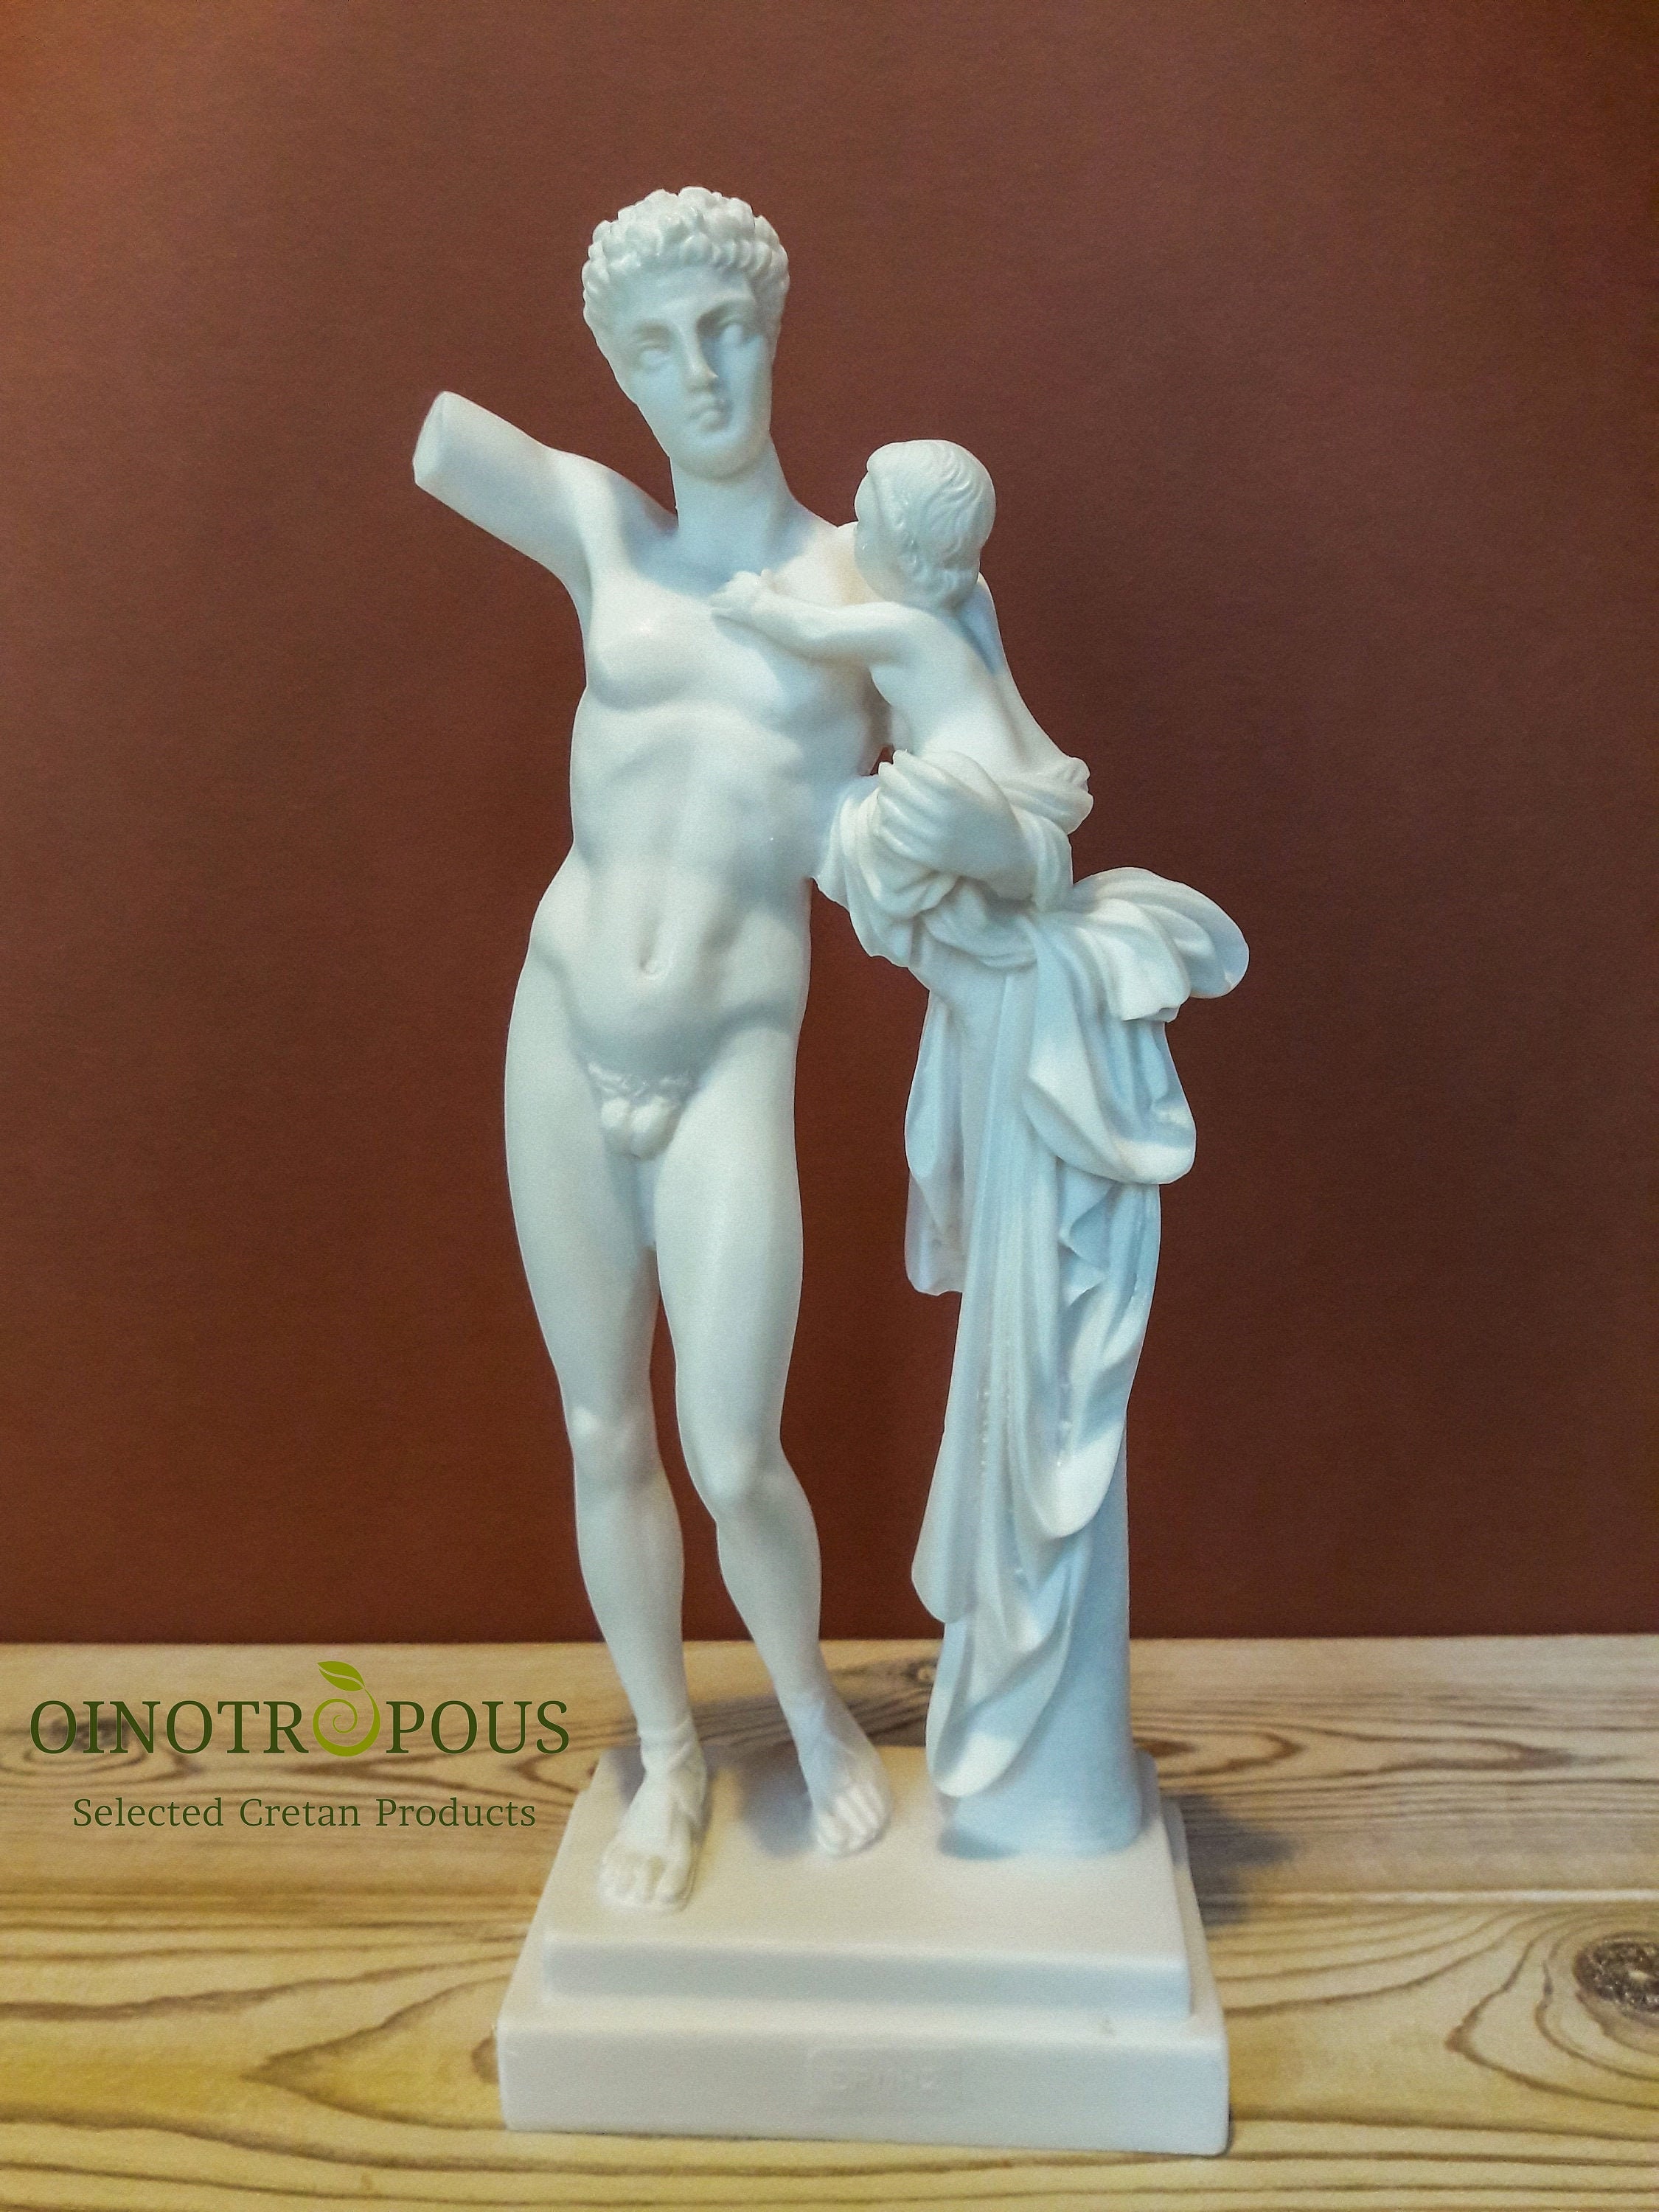 Hermes of Praxiteles Hermes and the Infant Dionysus Male | Etsy